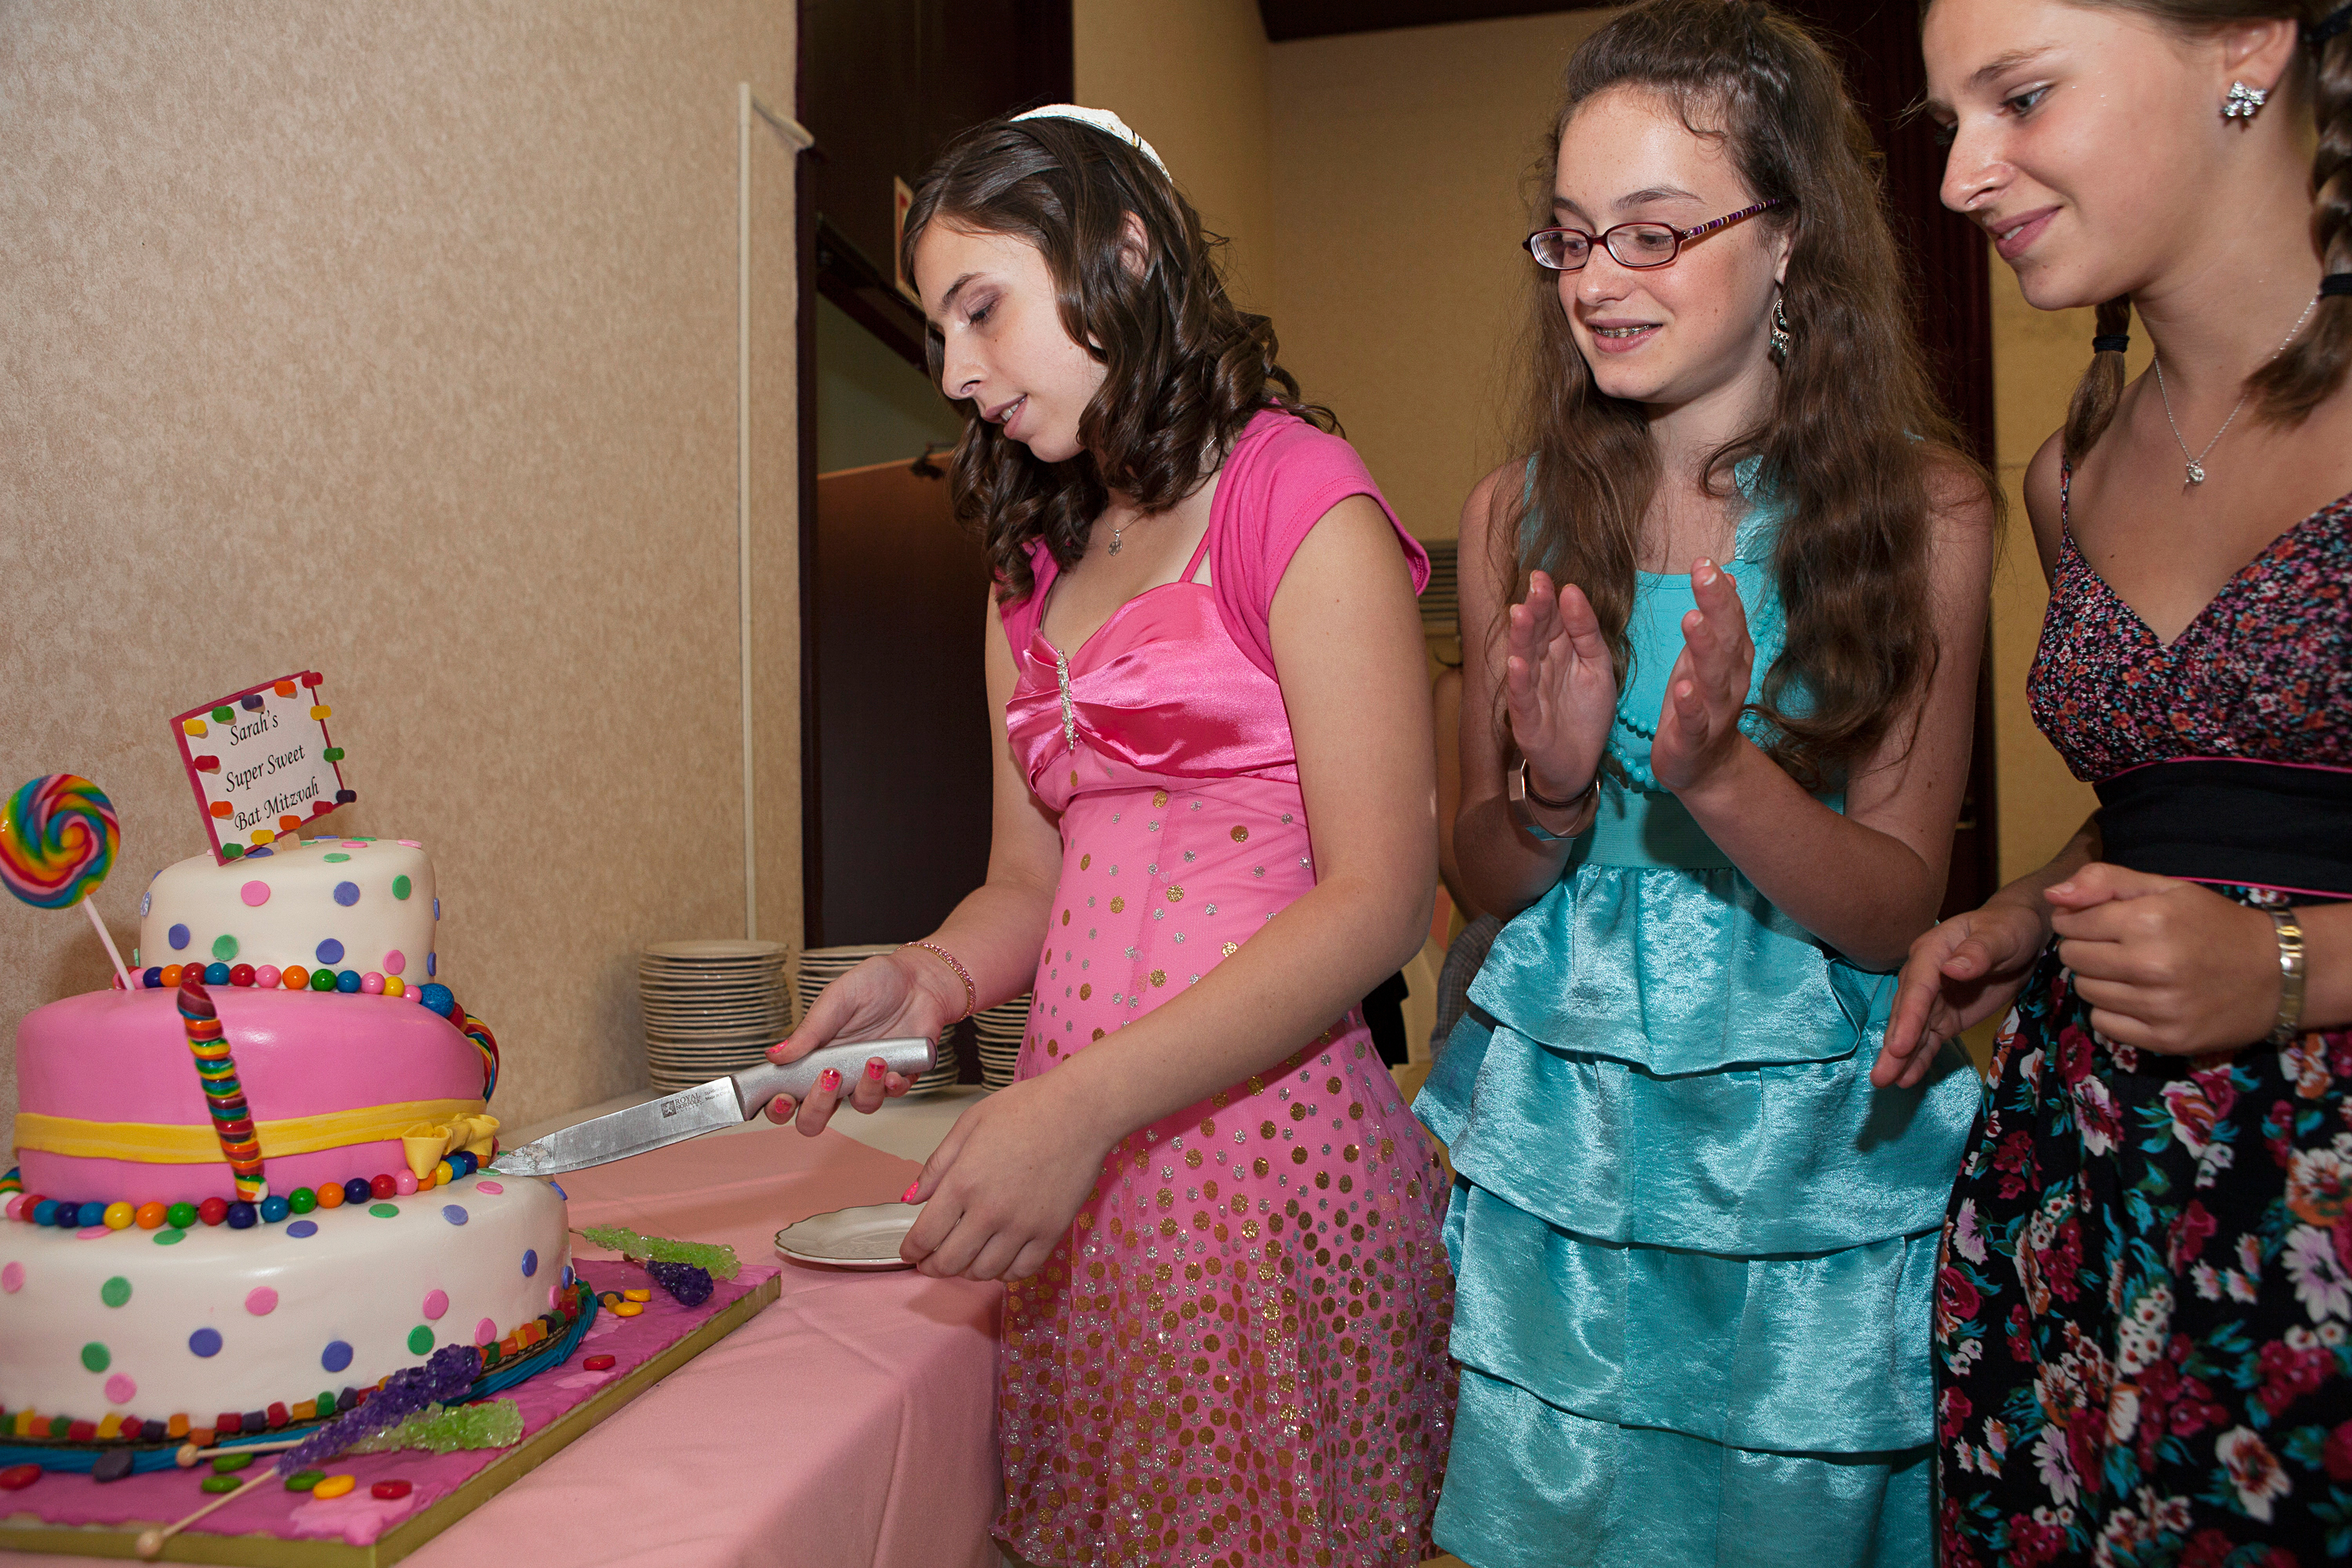 <strong>According to industry estimates, "the average bar or bat mitzvah budget runs roughly $15,000 to $30,000," writes <a href="http://www.emitz.com/budget" title="eMitz.com: the Bar Bat Mitzvah Planning, Ideas, Vendor Reviews and Invitations Site" target="_blank">eMitz.com</a>, the Bar and Bat Mitzvah Planning site. "Many variables come into play, such as: time of year, time of day, number of guests and the region.  Manhattan and LA are the priciest."</strong>
                                            
                                            Title: "Sarah's Bat Mitzvah, Buffalo, NY," from the series <a href="http://www.rebeccagreenfield.com/#a=0&amp;at=0&amp;mi=2&amp;pt=1&amp;pi=10000&amp;s=0&amp;p=4" title="Coming of Age" target="_blank"><em>Coming of Age.</em></a>
                                            
                                            <a href="http://www.rebeccagreenfield.com/" title="Rebecca Greenfield" target="_blank">Rebecca Greenfield</a> has been documenting contemporary American female rites of passage for the past six years, photographing coming of age traditions such as Quinceañeras, Bat Mitzvahs, Debutante Balls, Prom, Homecoming, Sweet Sixteen, Purity Balls, Sorority Rush, Apache Sunrise Dances and more. She looks forward to publishing the project in book form when complete.